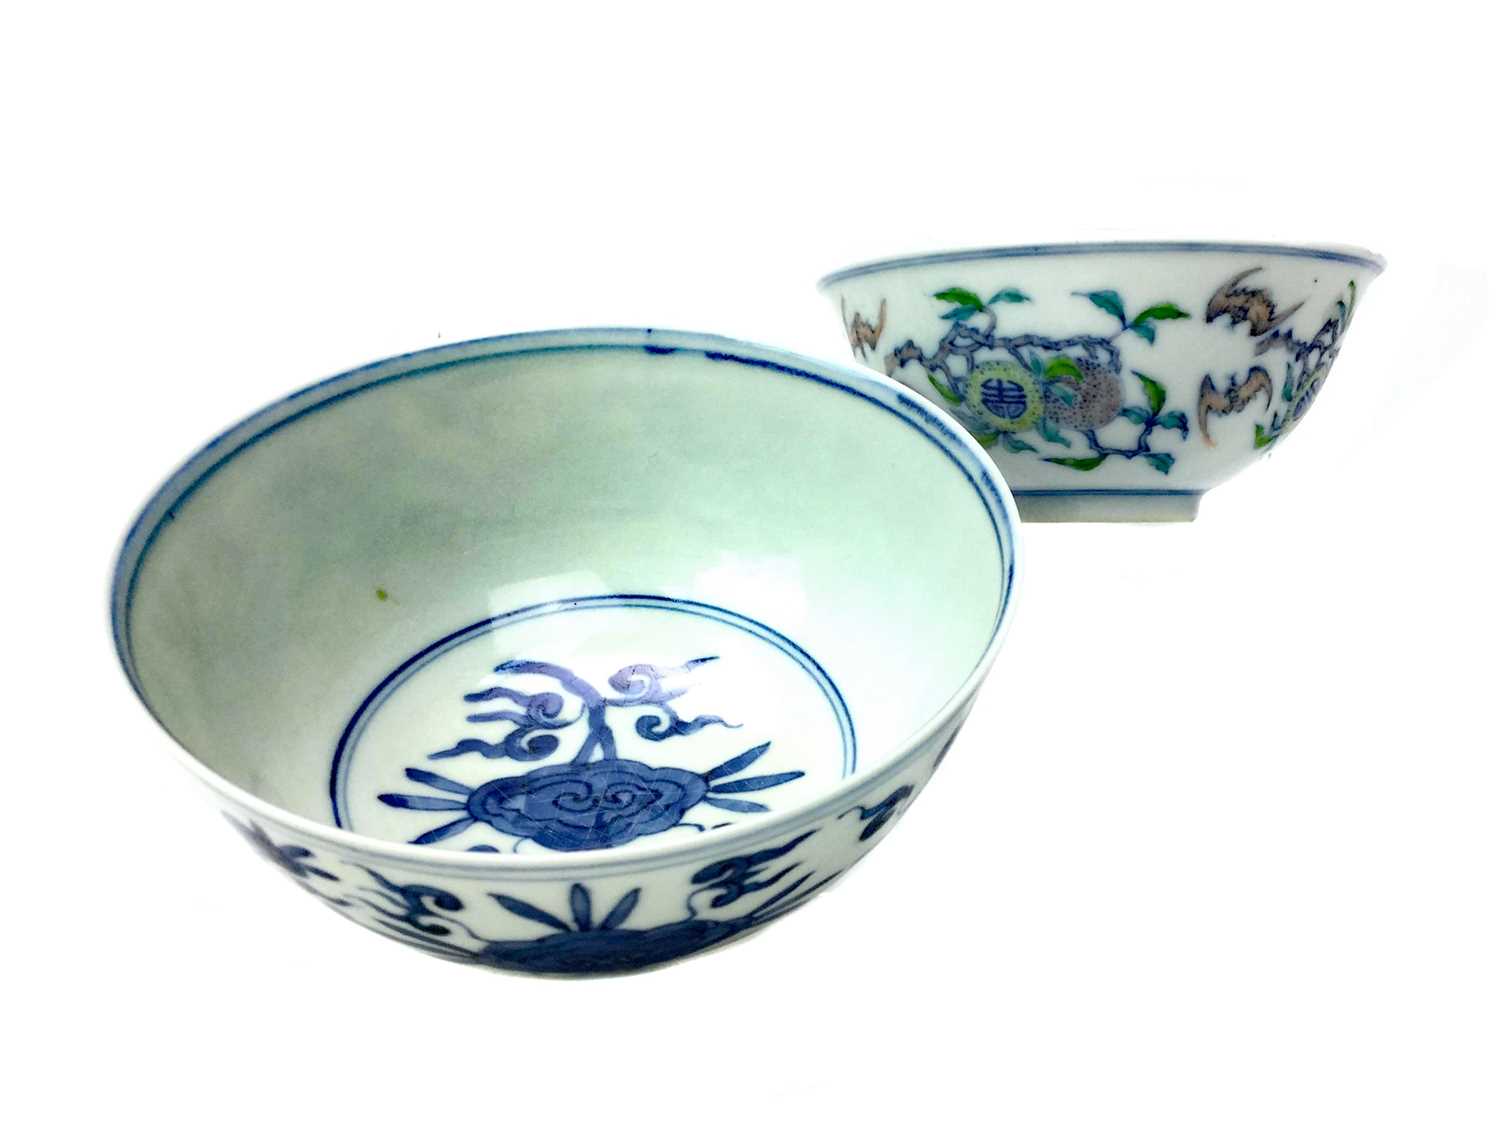 Lot 719 - A LOT OF TWO CHINESE BOWLS